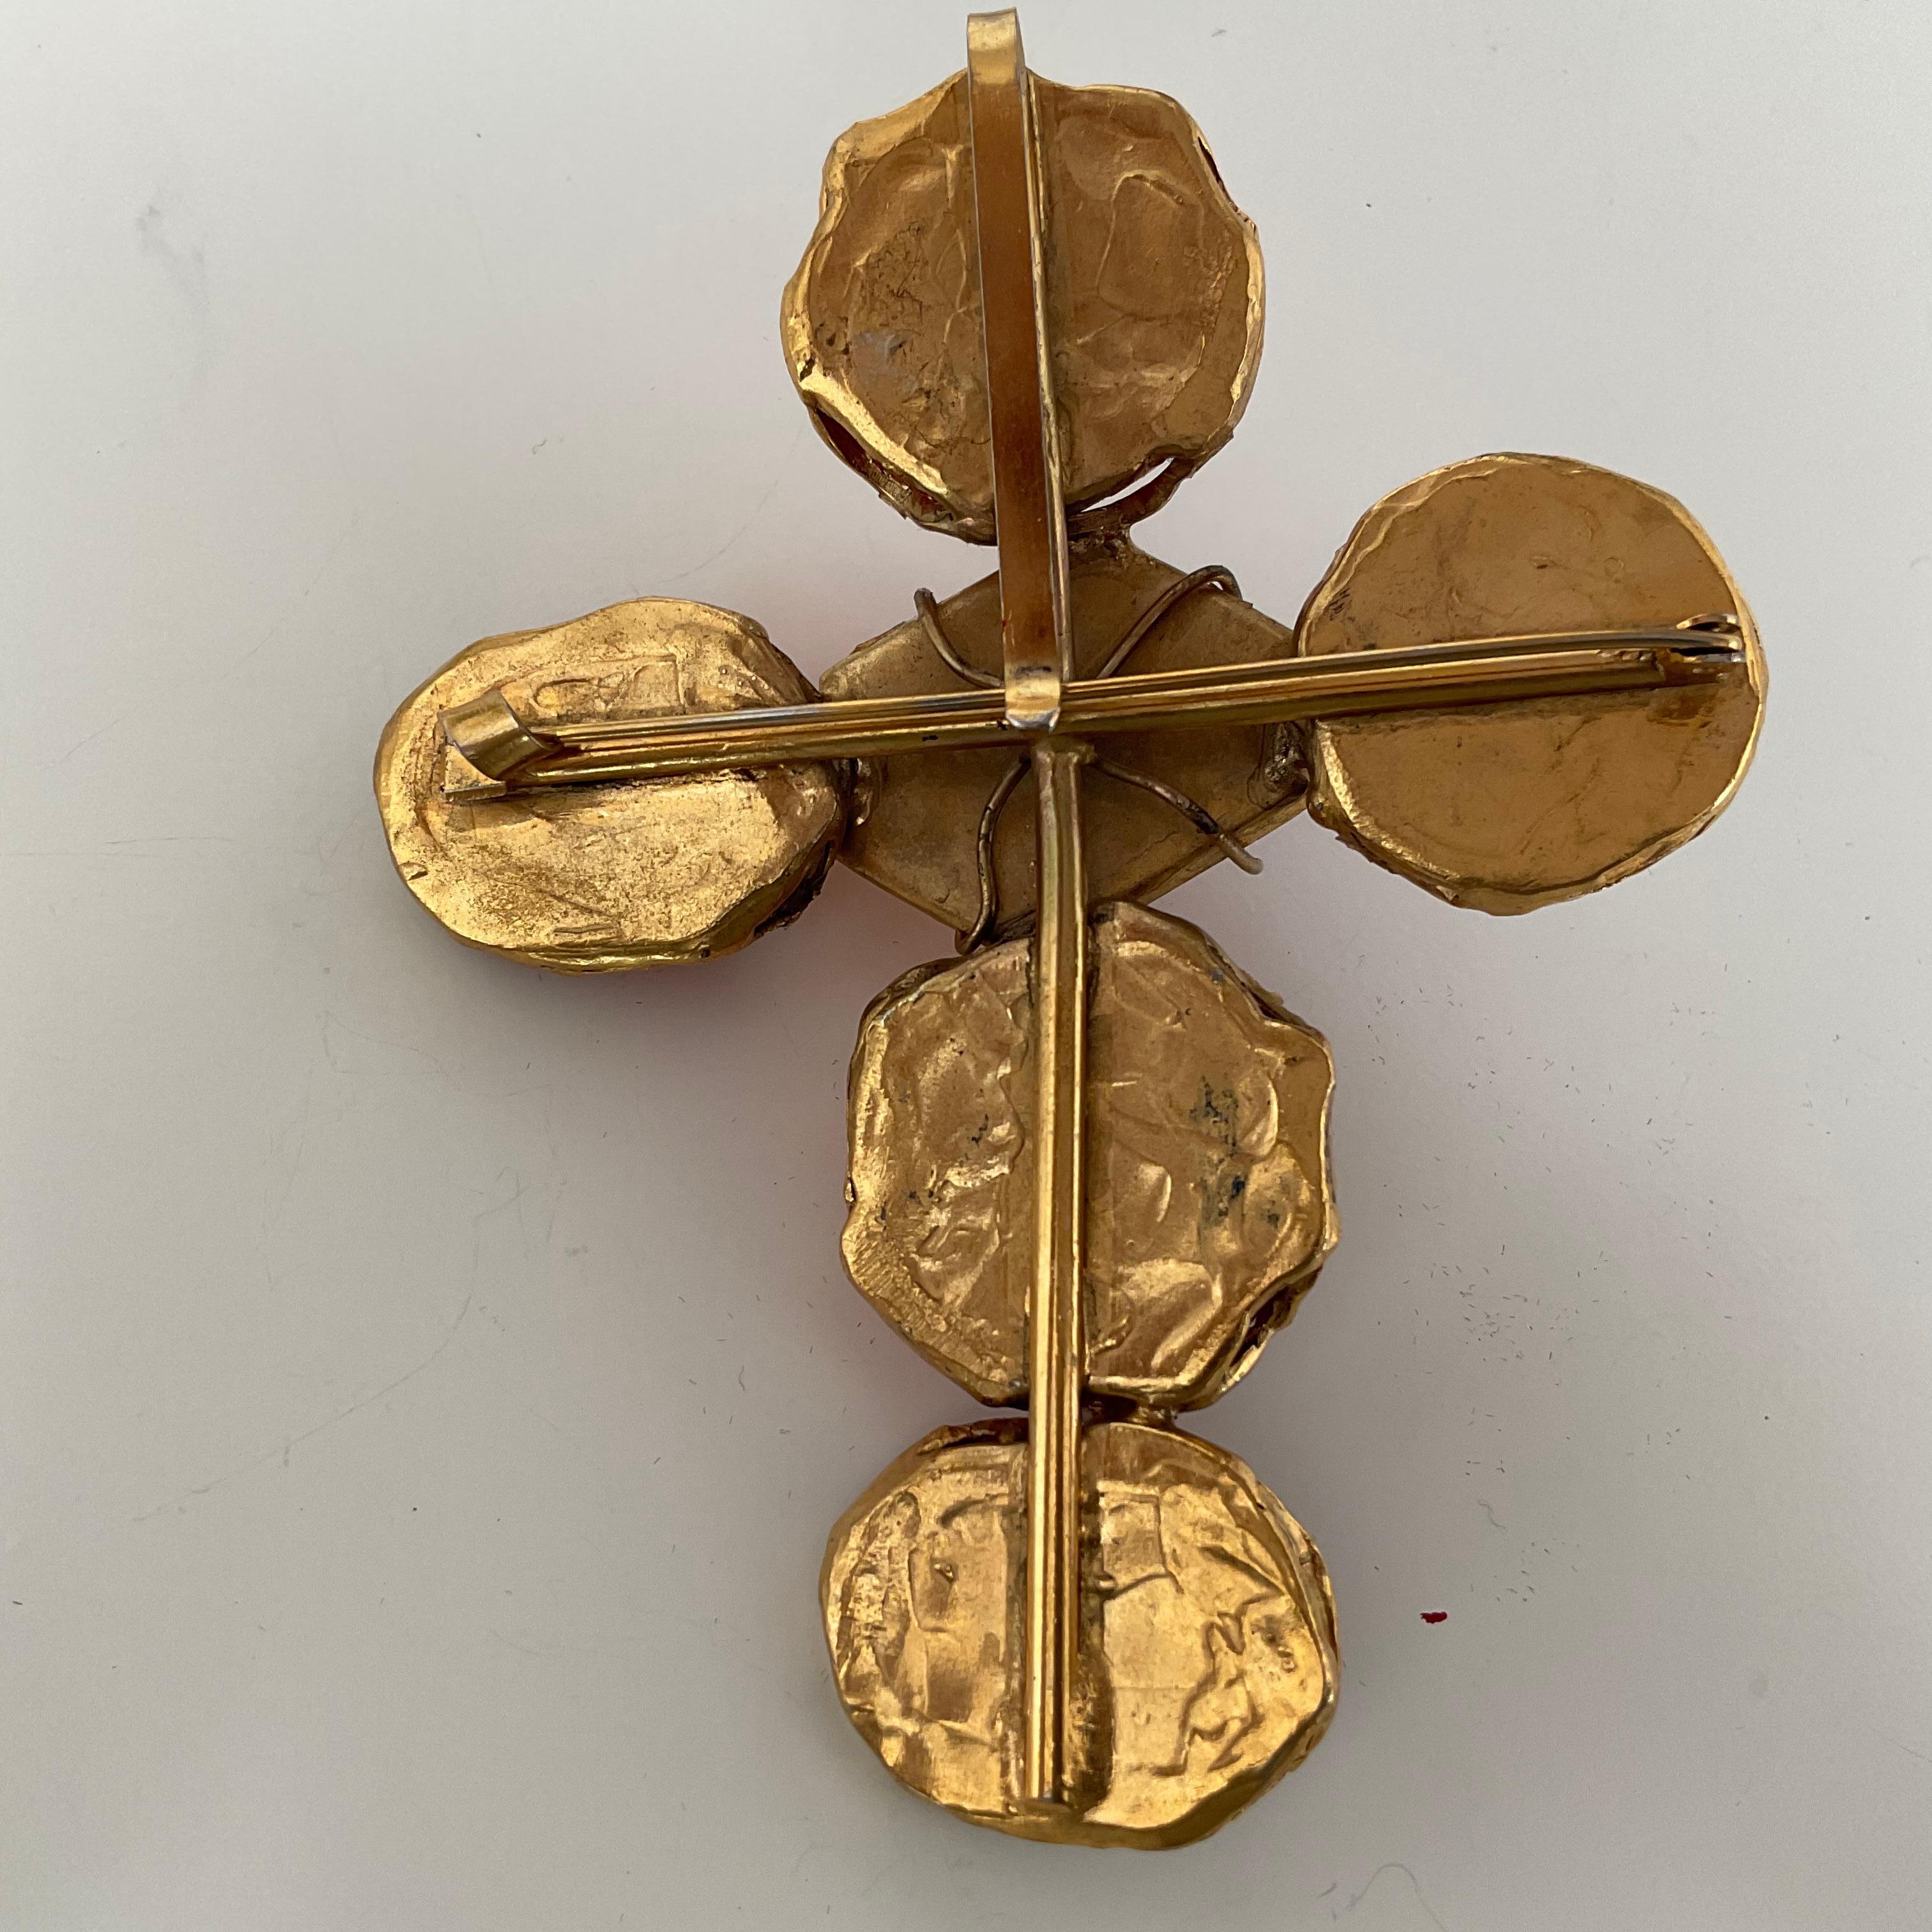 This singulare vintage piece from YVES SAINT LAURENT is a brooch from the 70's. It is designed as a cross with red and orange-toned stones in resin. A total of six stones are present, going from darker to lighter towards the centre. The orange stone